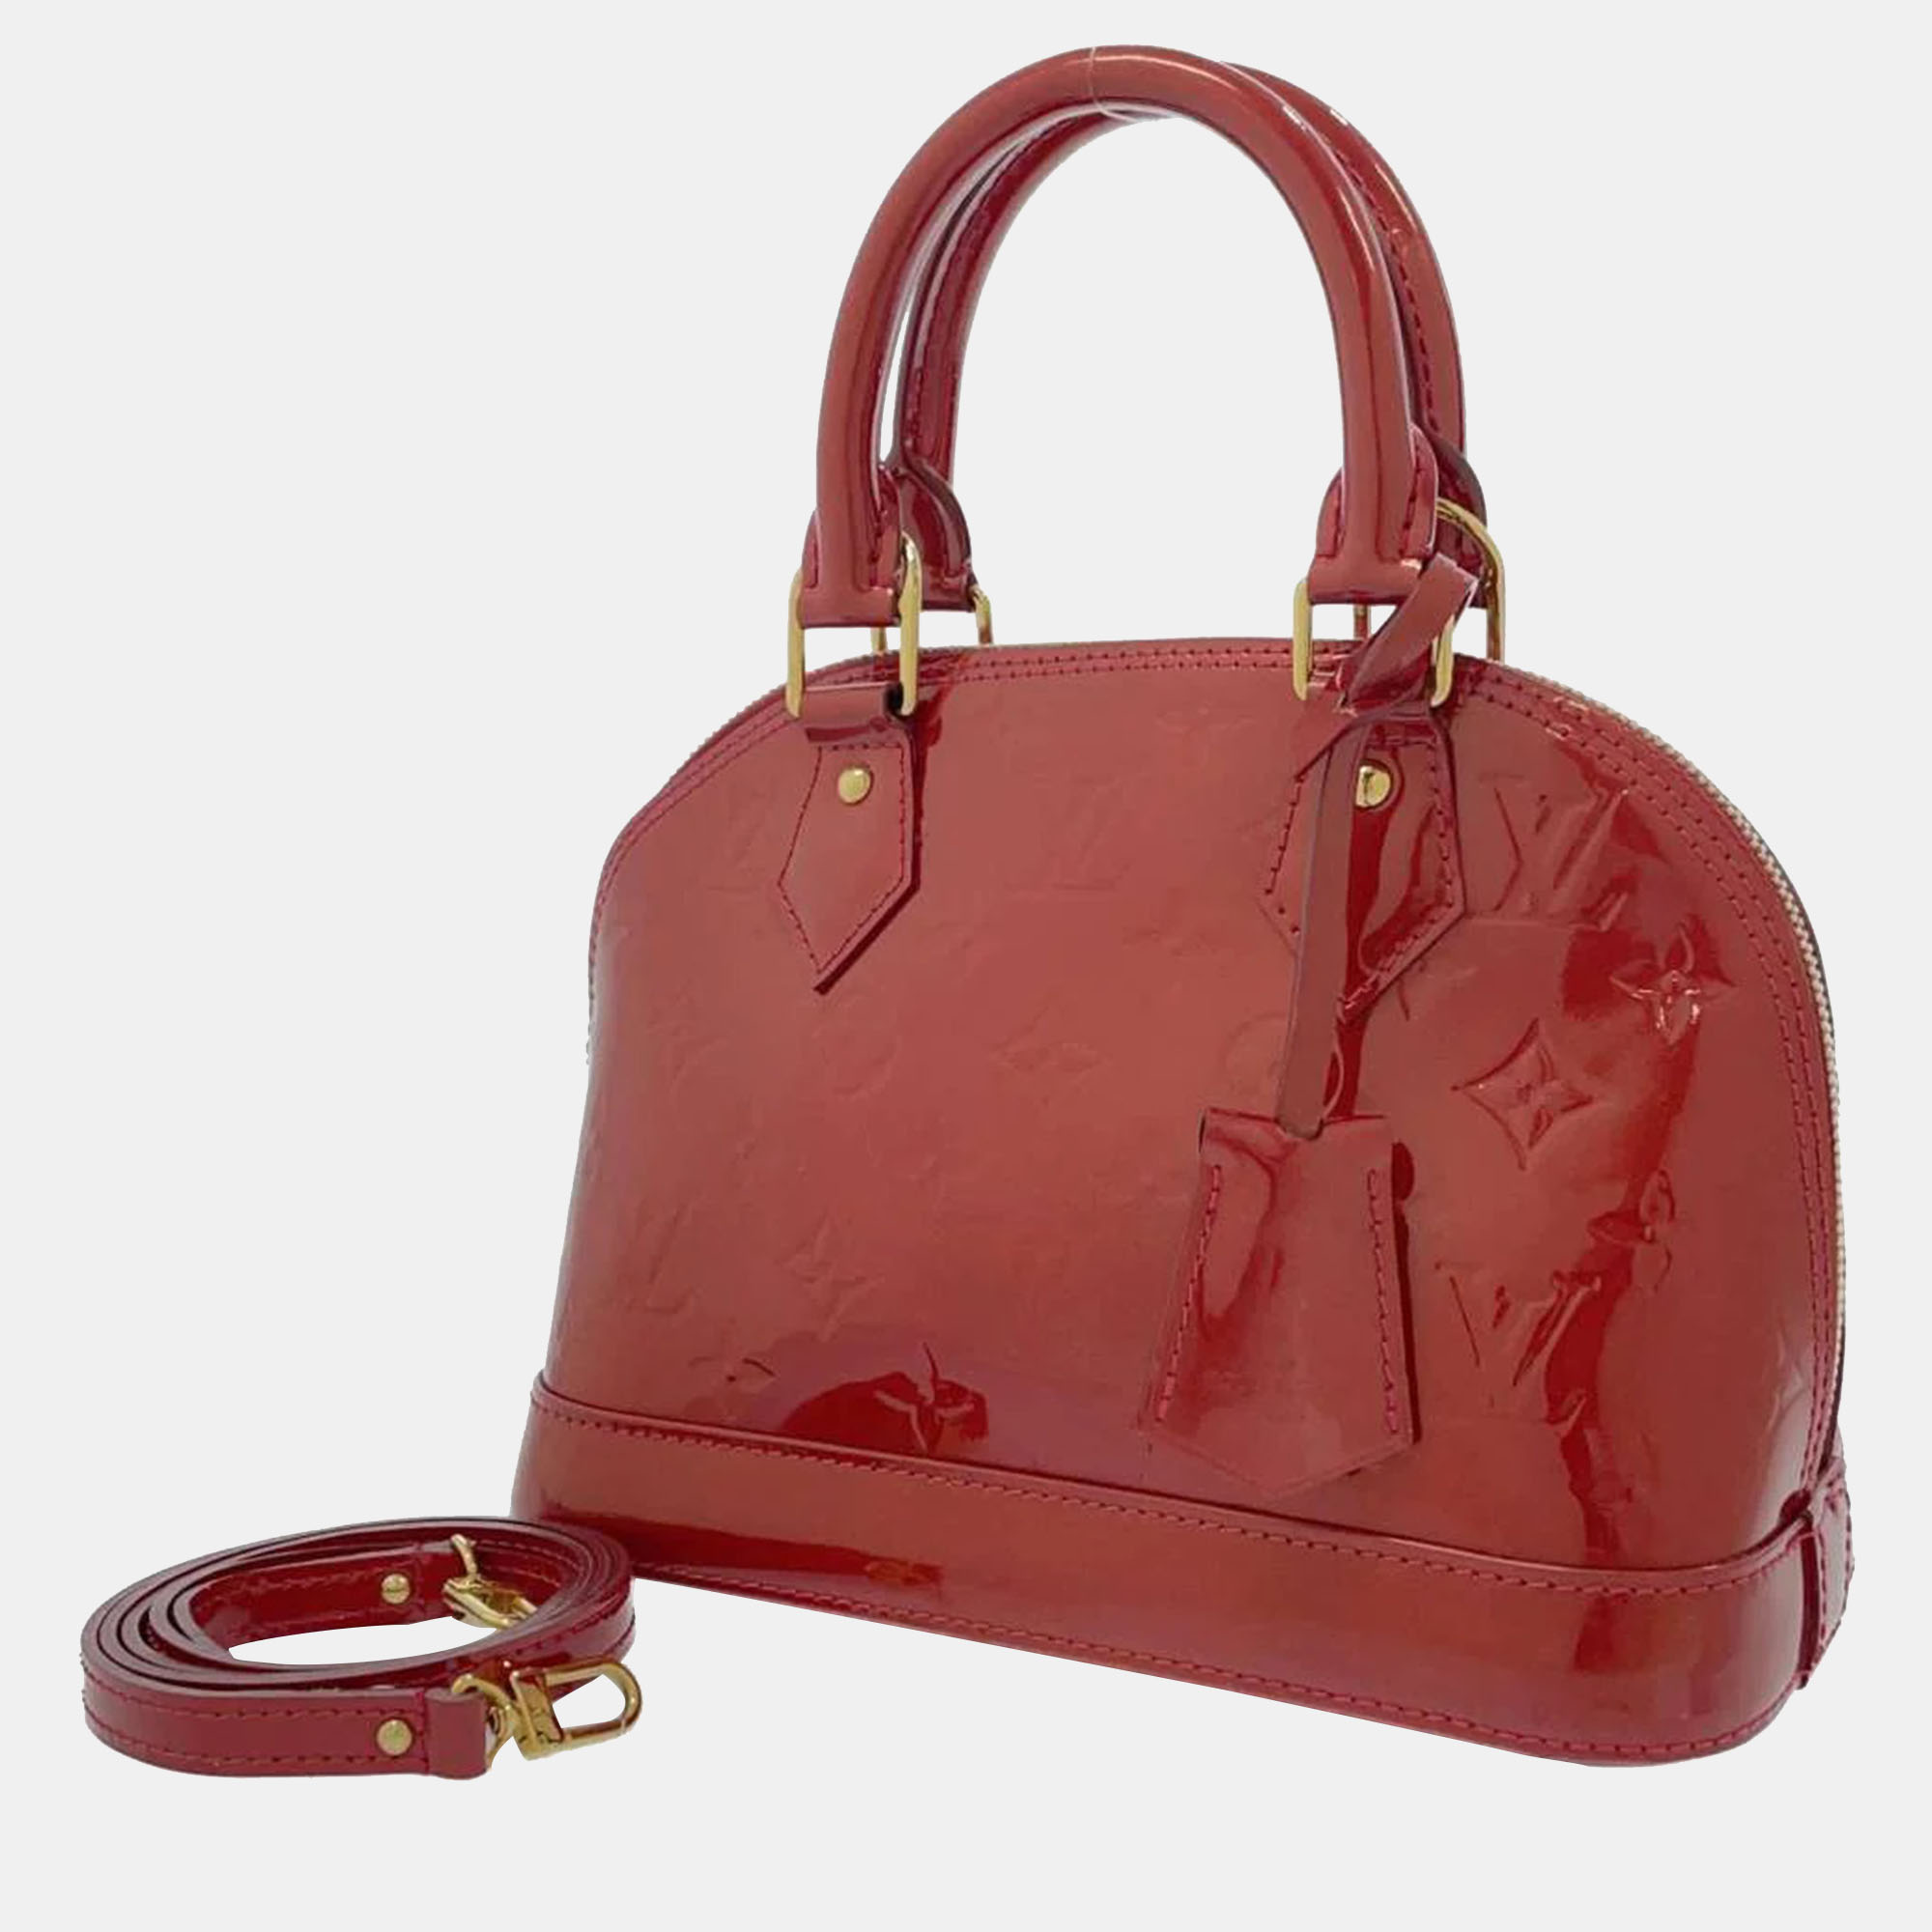 Pre-owned Louis Vuitton Red Monogram Vernis Leather Alma Bb Satchel